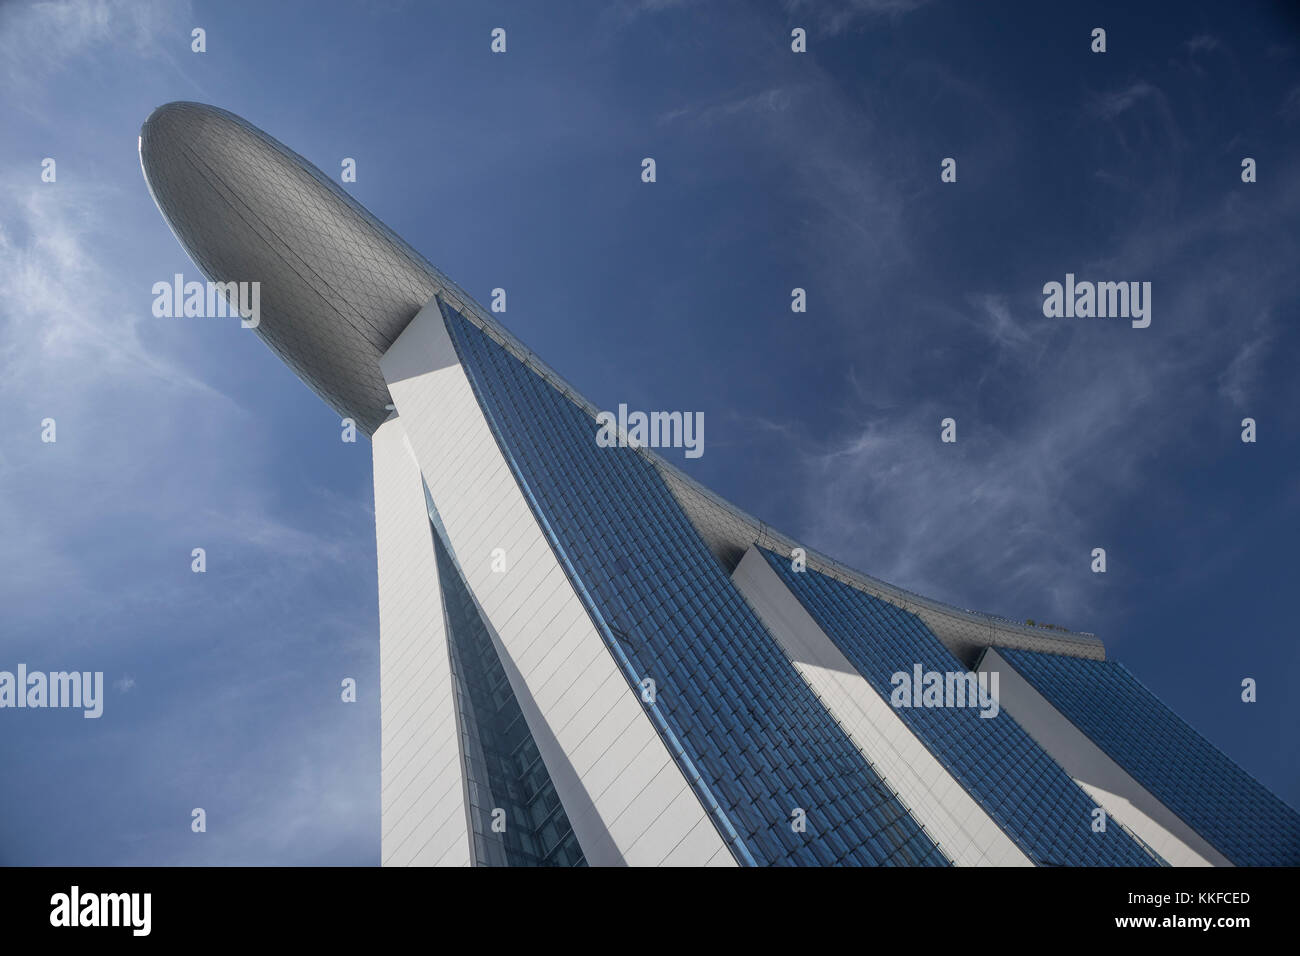 The Singapore Flyer, in Singapore photographed from ground level Stock Photo